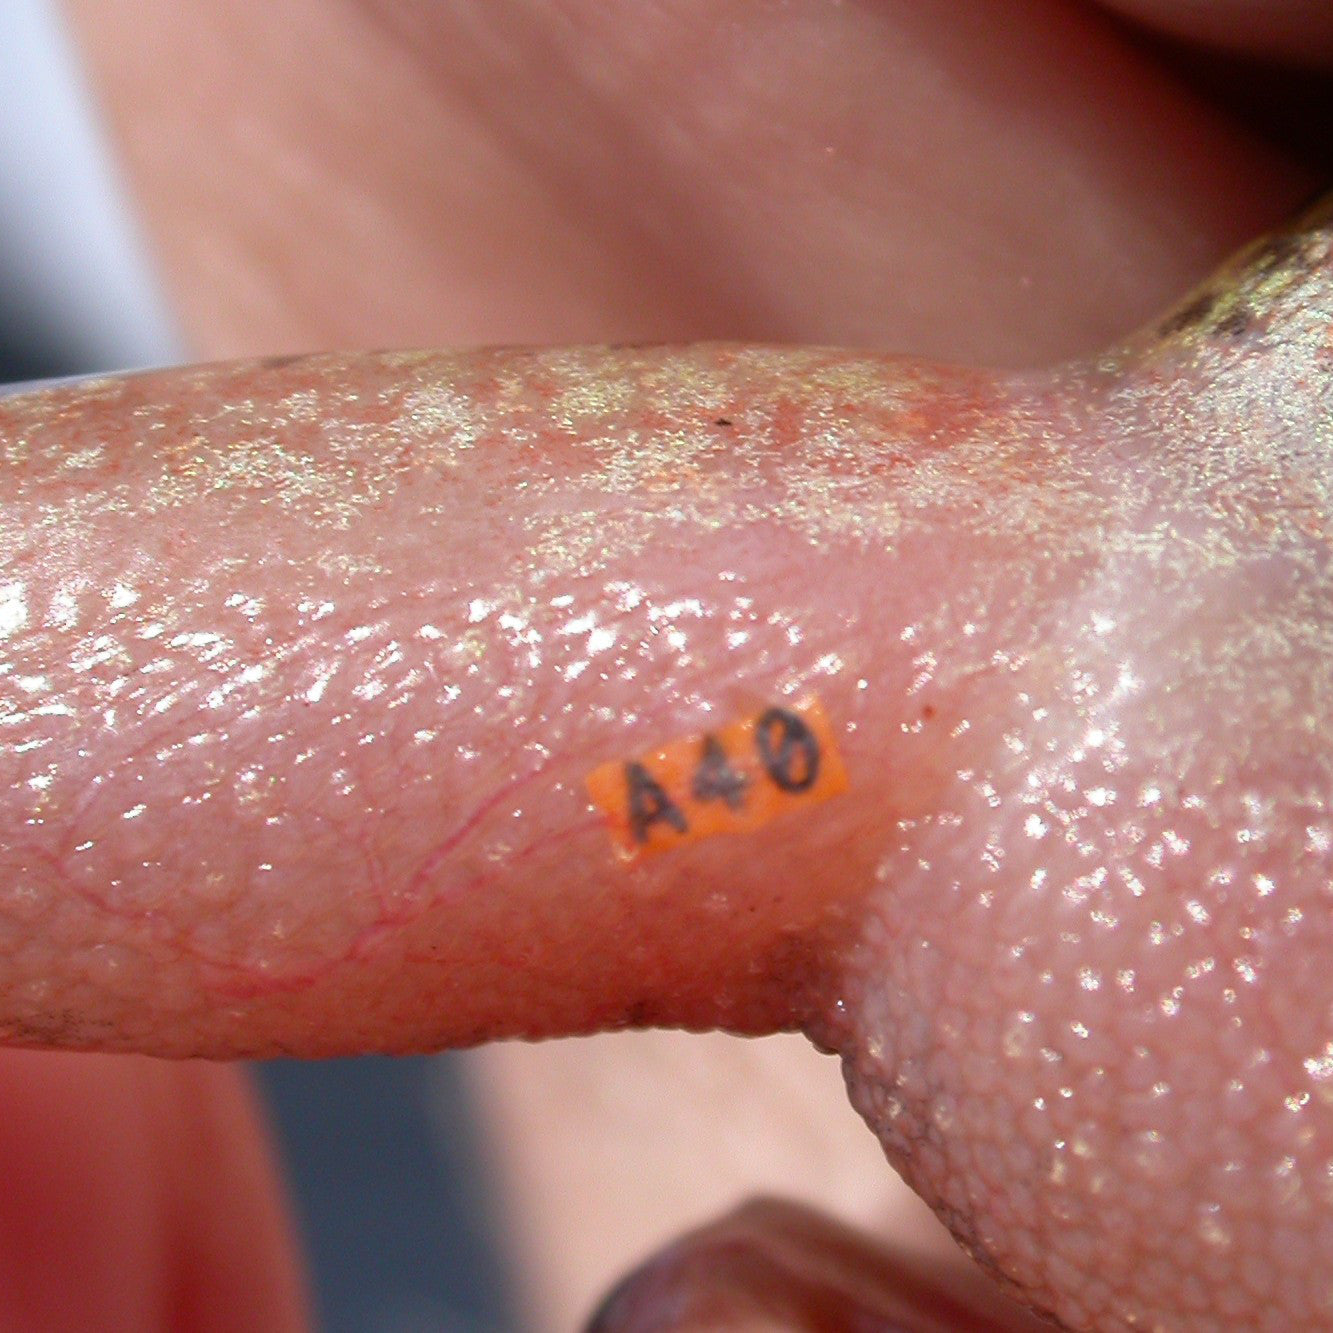 VI Alpha Tags can be injected under clear and lightly pigmented tissue, as in this frog leg.